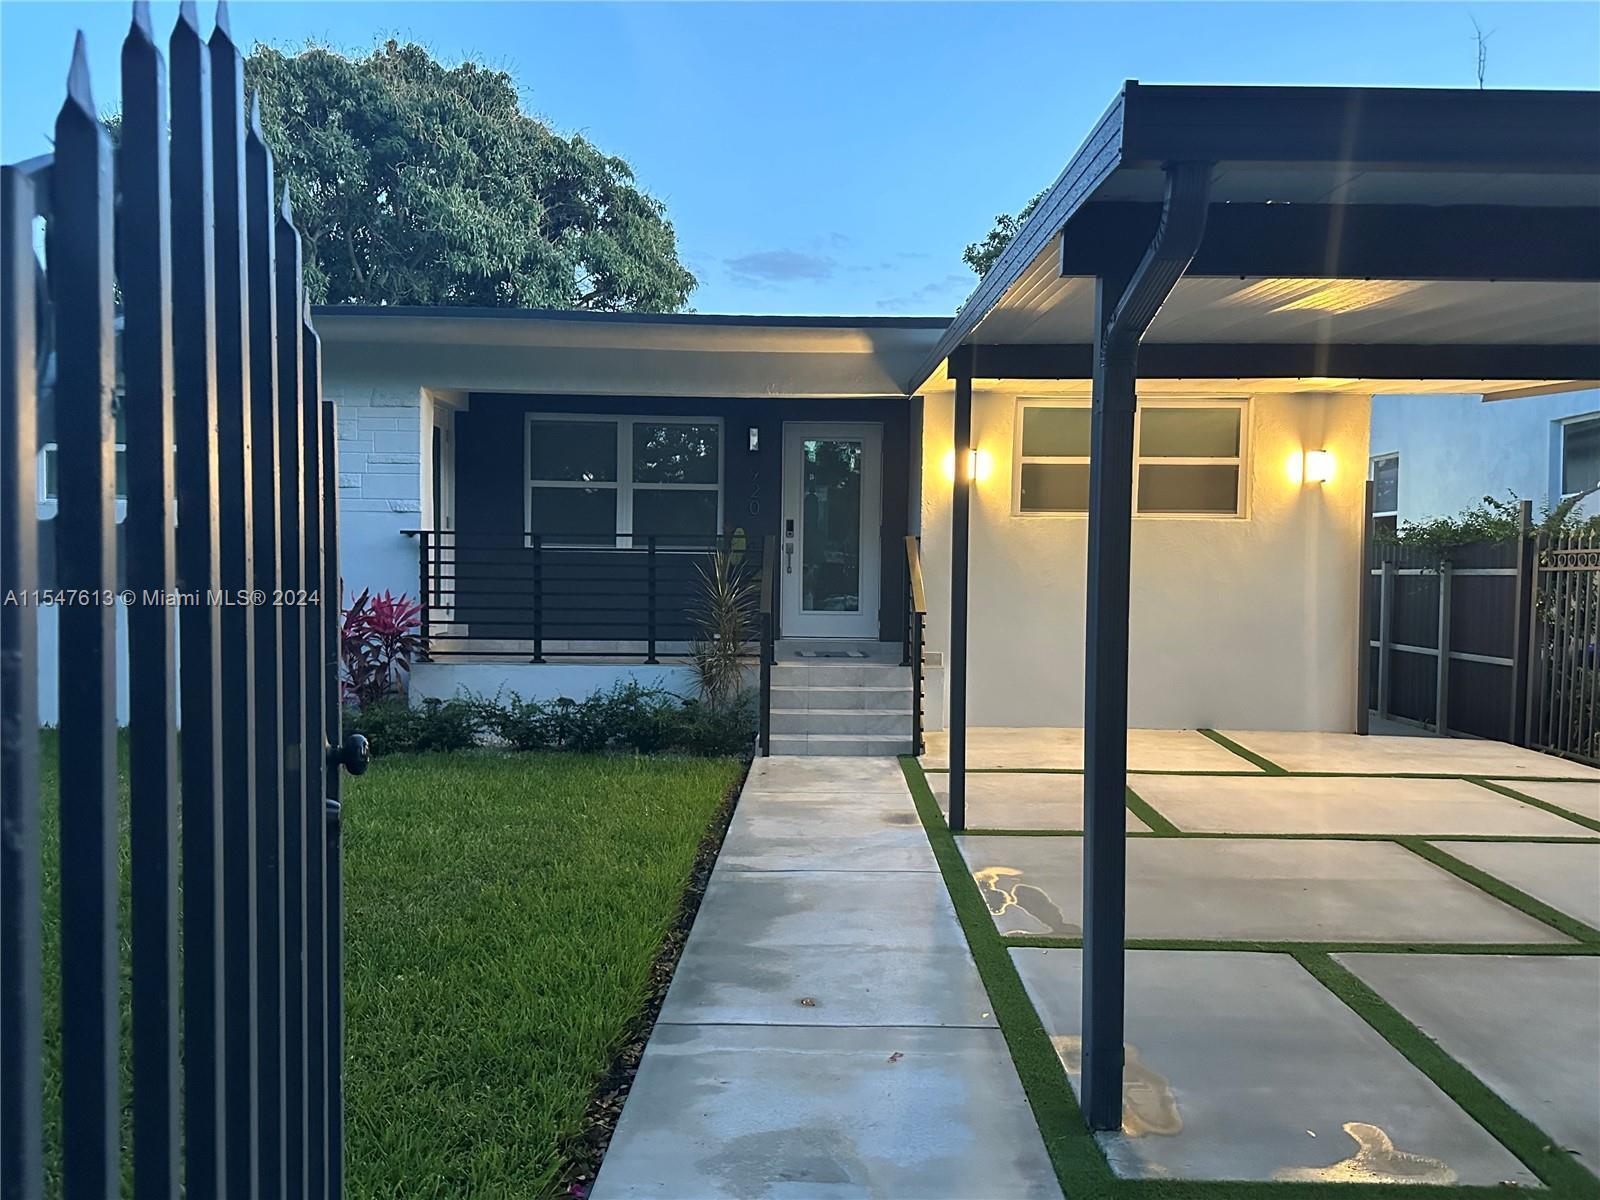 Photo of 920 NW 46th St in Miami, FL